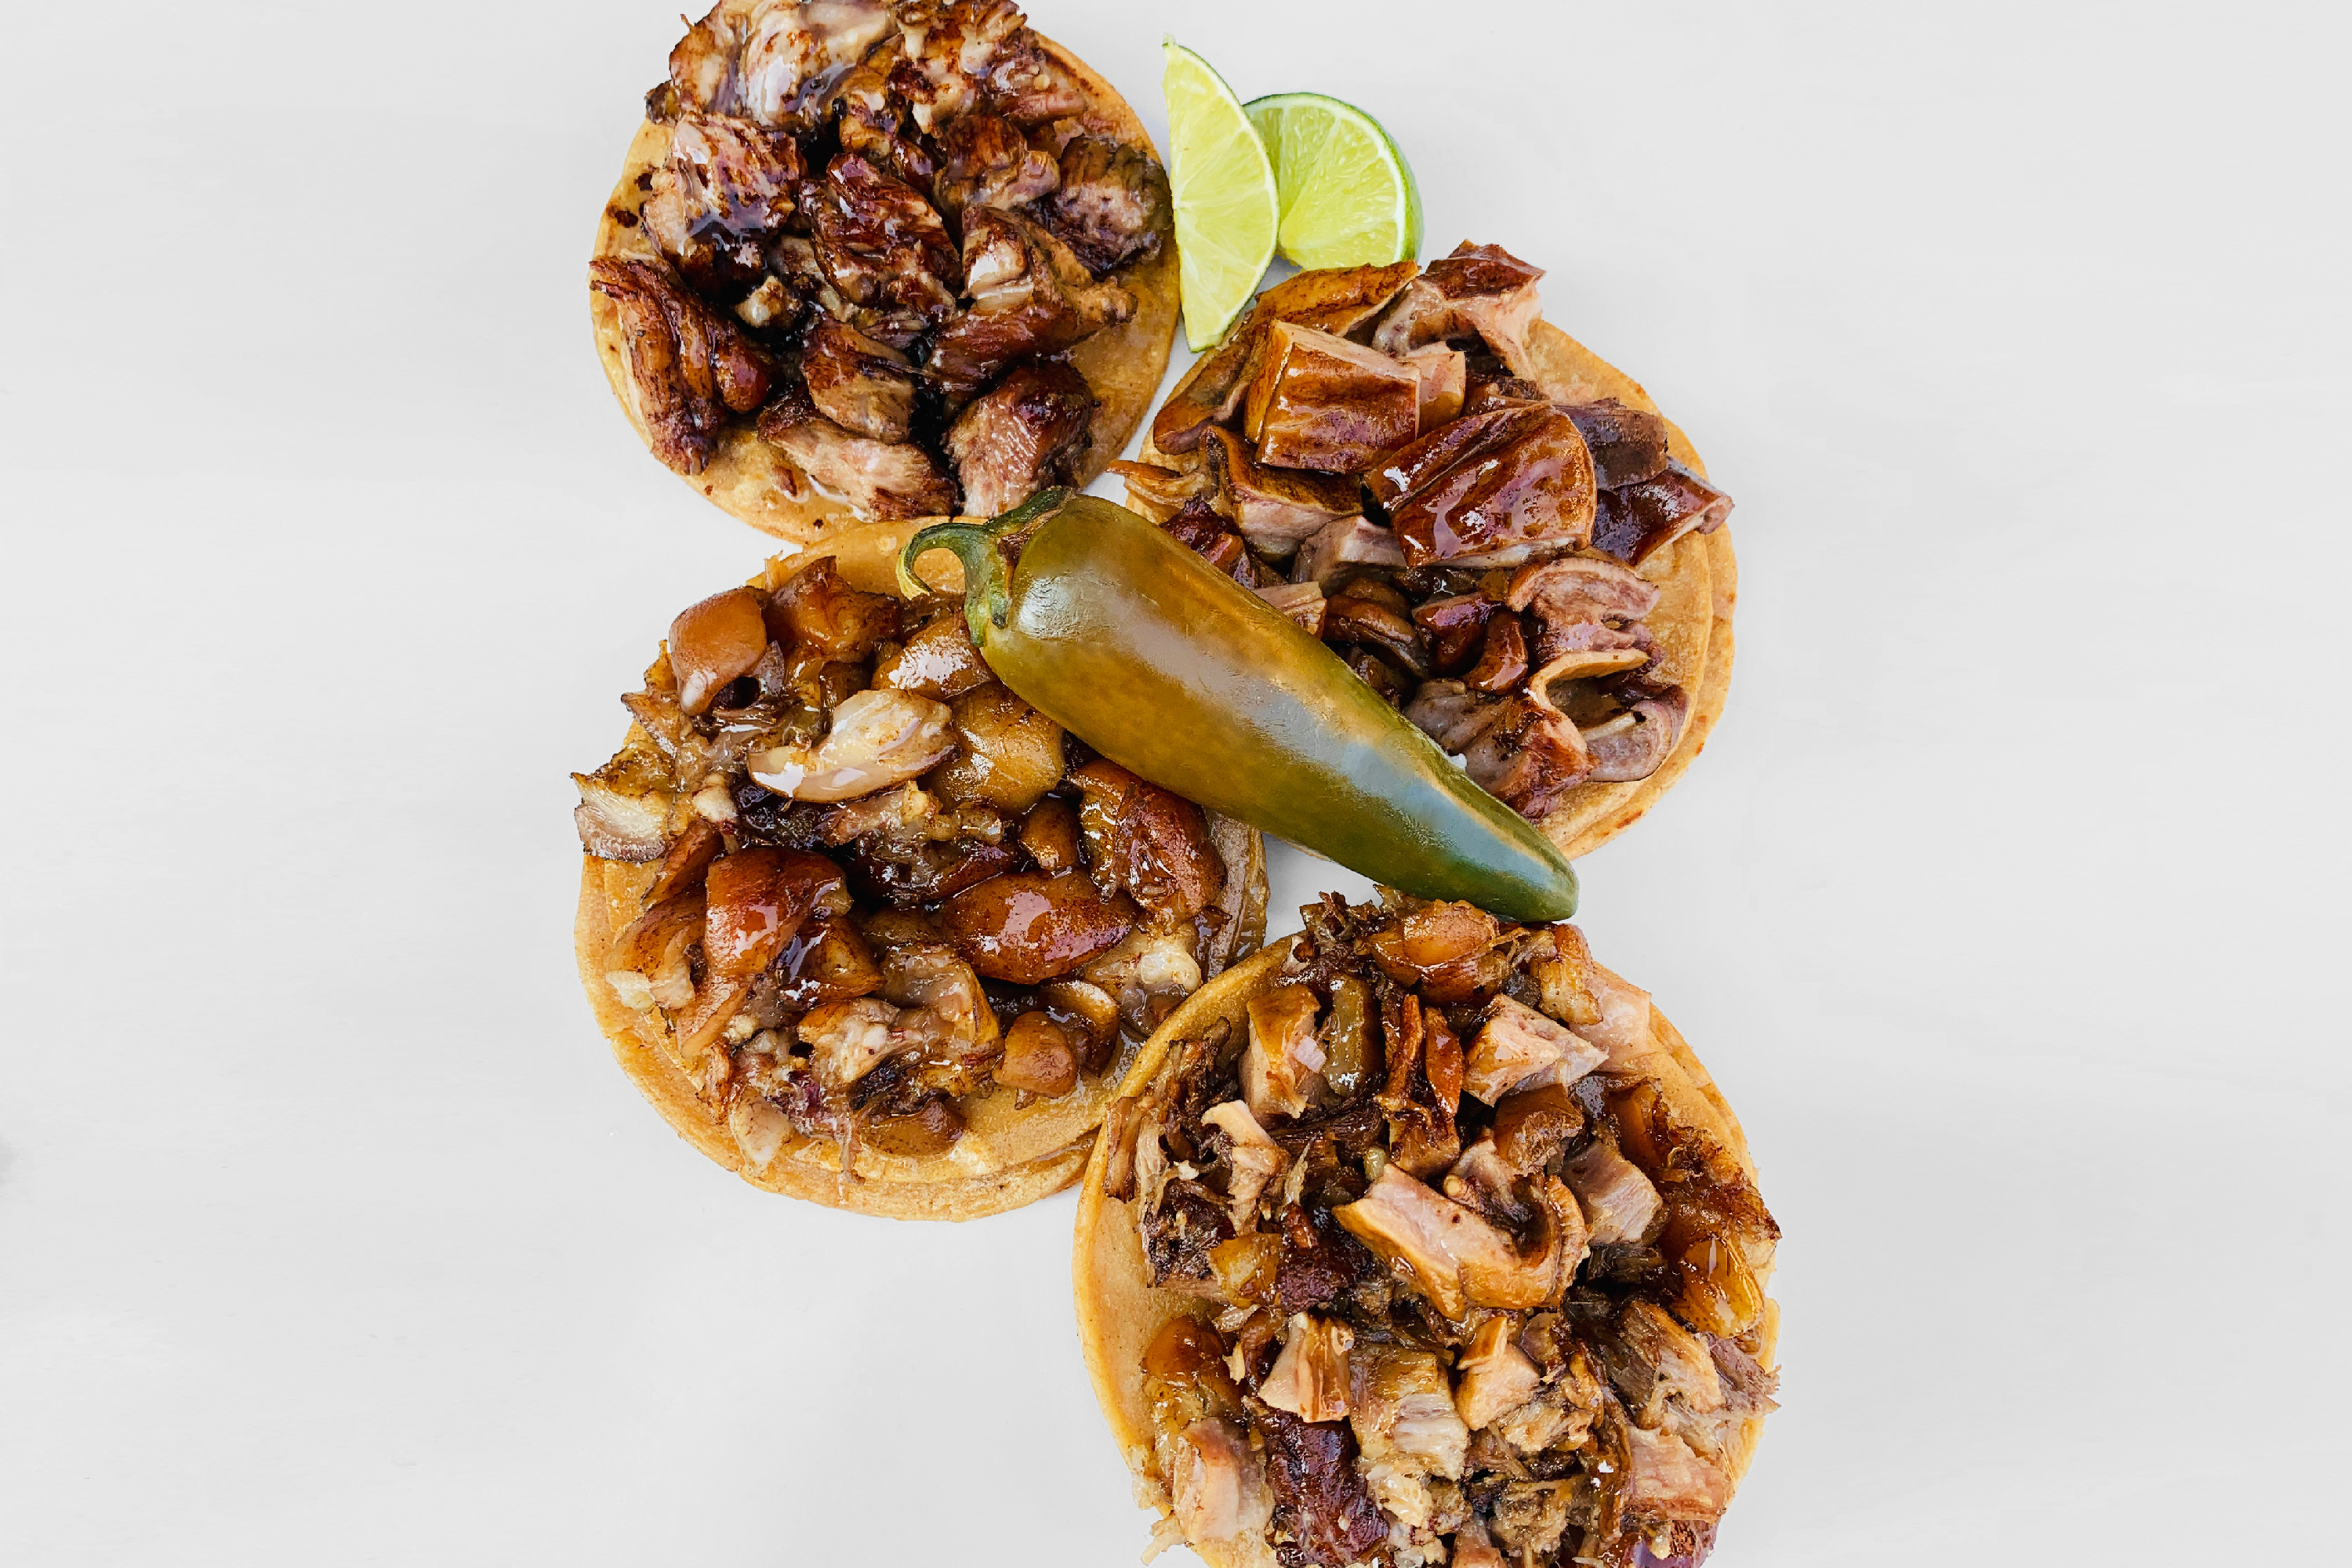 Four meat-laden tacos laid out on a white background with a large jalapeno pepper placed in the center